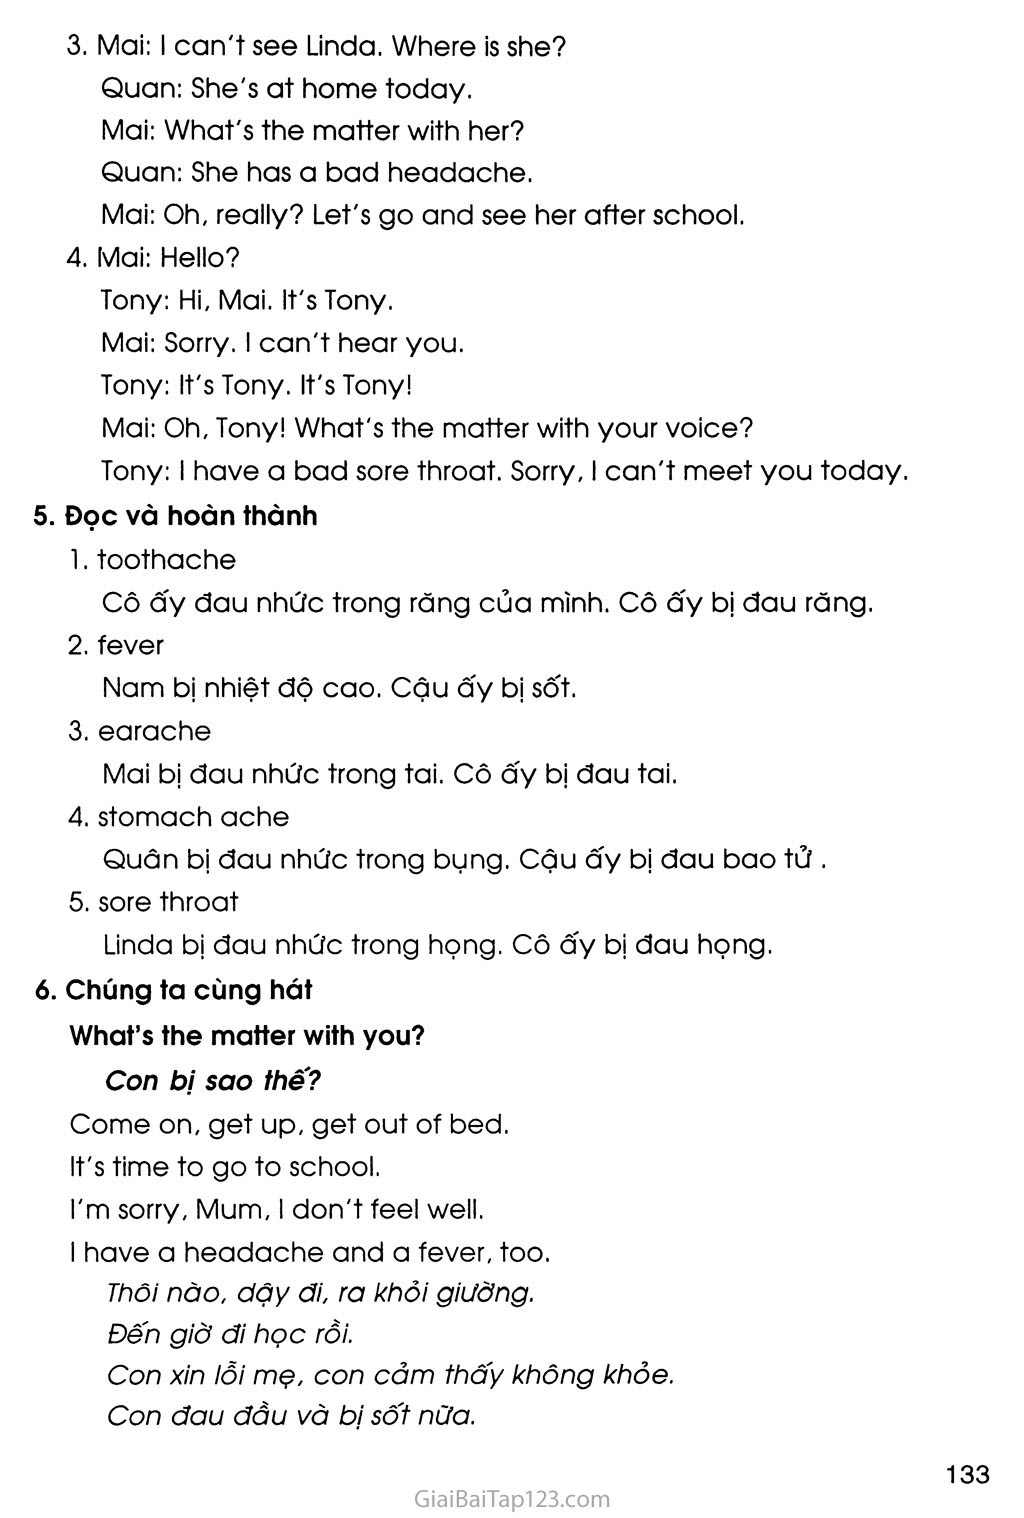 UNIT 11: WHAT’S THE MATTER WITH YOU? trang 6